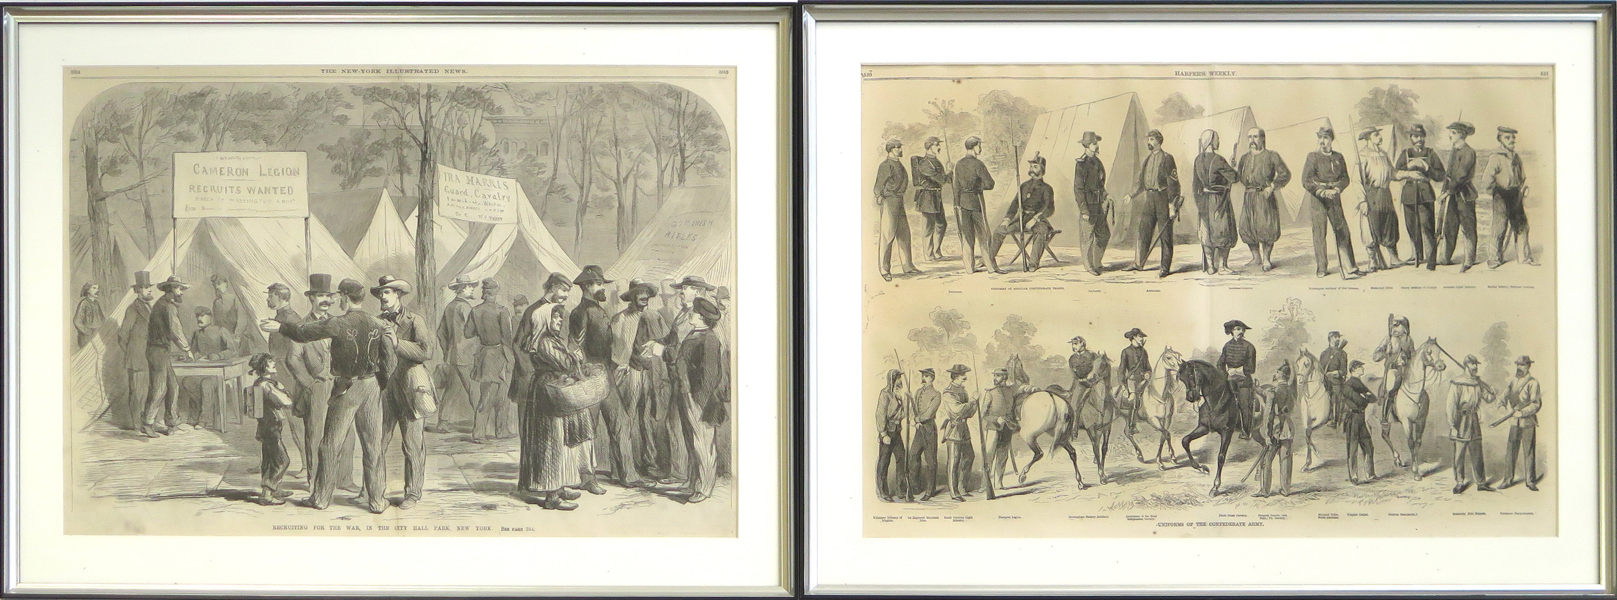 Litografier, 2 st: Amerikanska Inbördeskriget; "Uniforms of the Confederate Army" ur  "Harper's weekly" 17/8 1861 samt "Recruiting for the war, in the City Hall Park, New York" _28403a_lg.jpeg